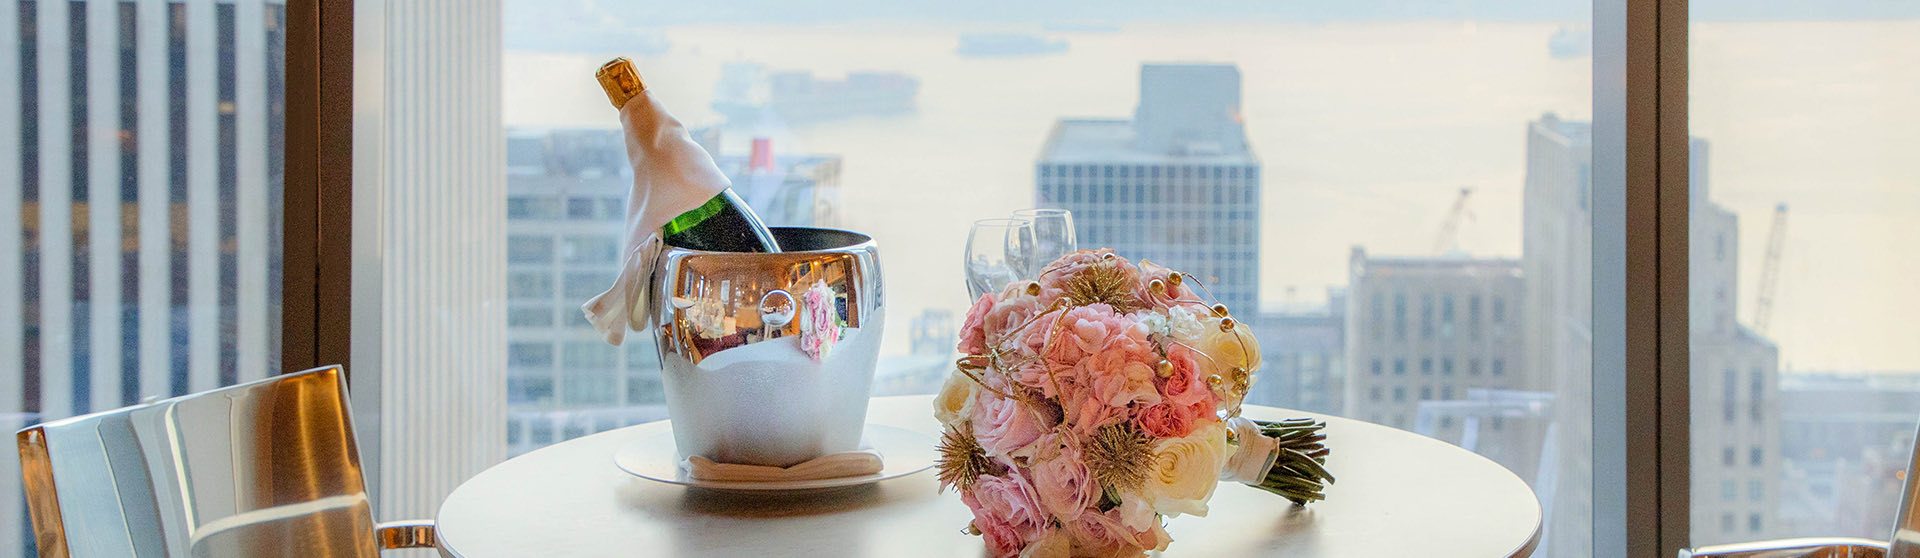 bouquet of flowers and a bottle of chilled champagne on the table with the view of the city in the background